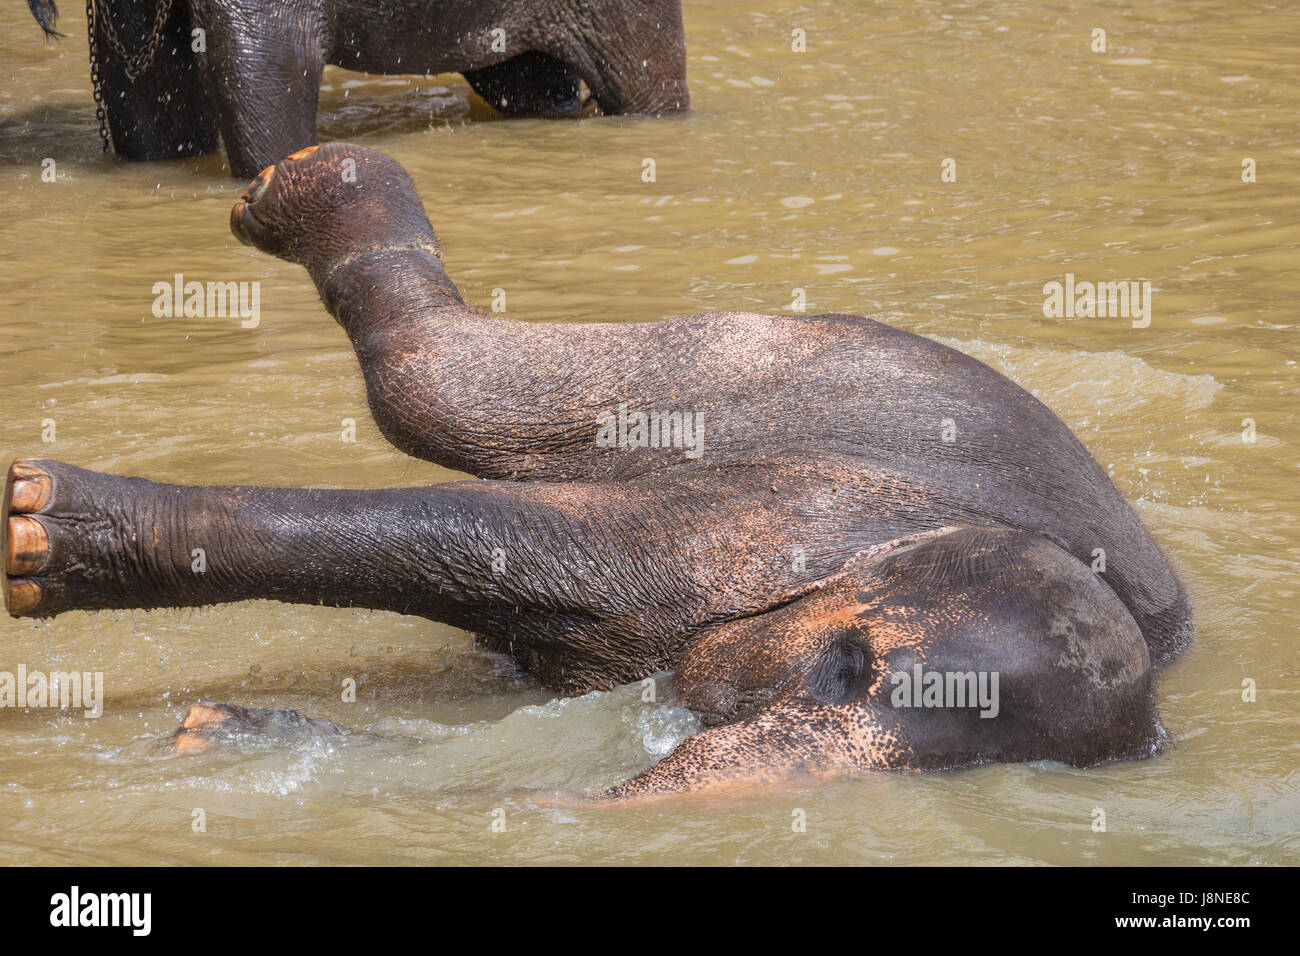 Elephant enjoying its bath in the river. Selective focus on the animal. Stock Photo